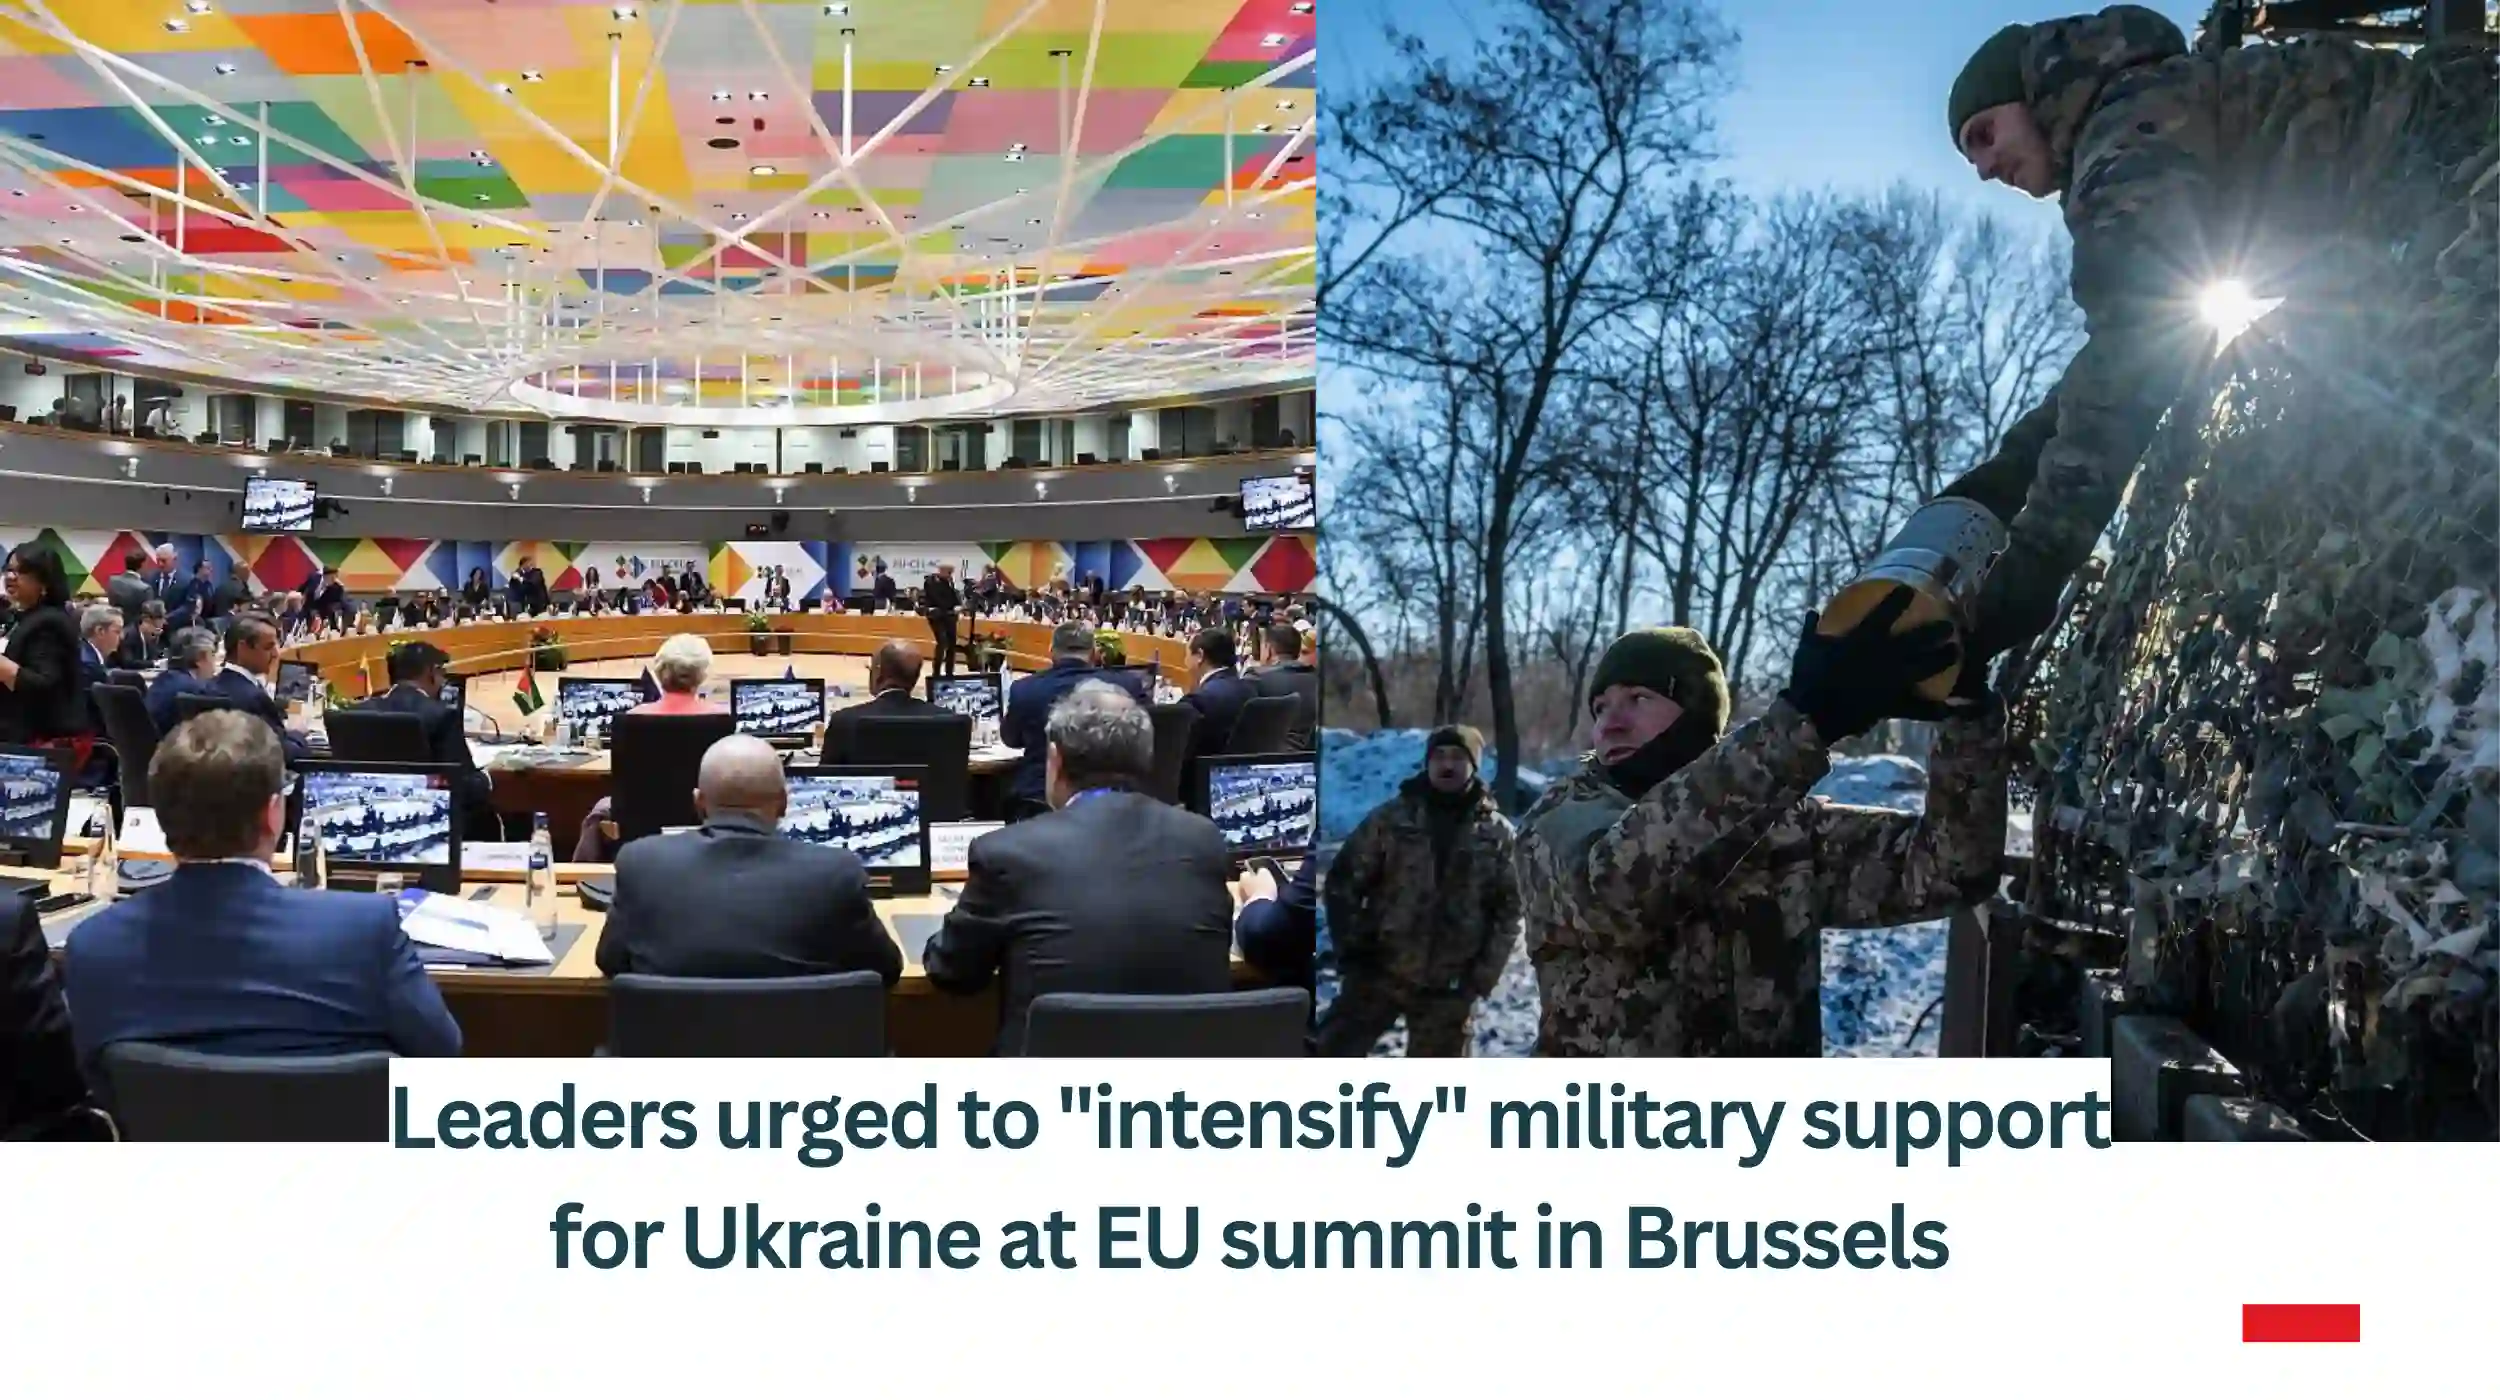 Leaders-urged-to-intensify-military-support-for-Ukraine-at-EU-summit-in-Brussels